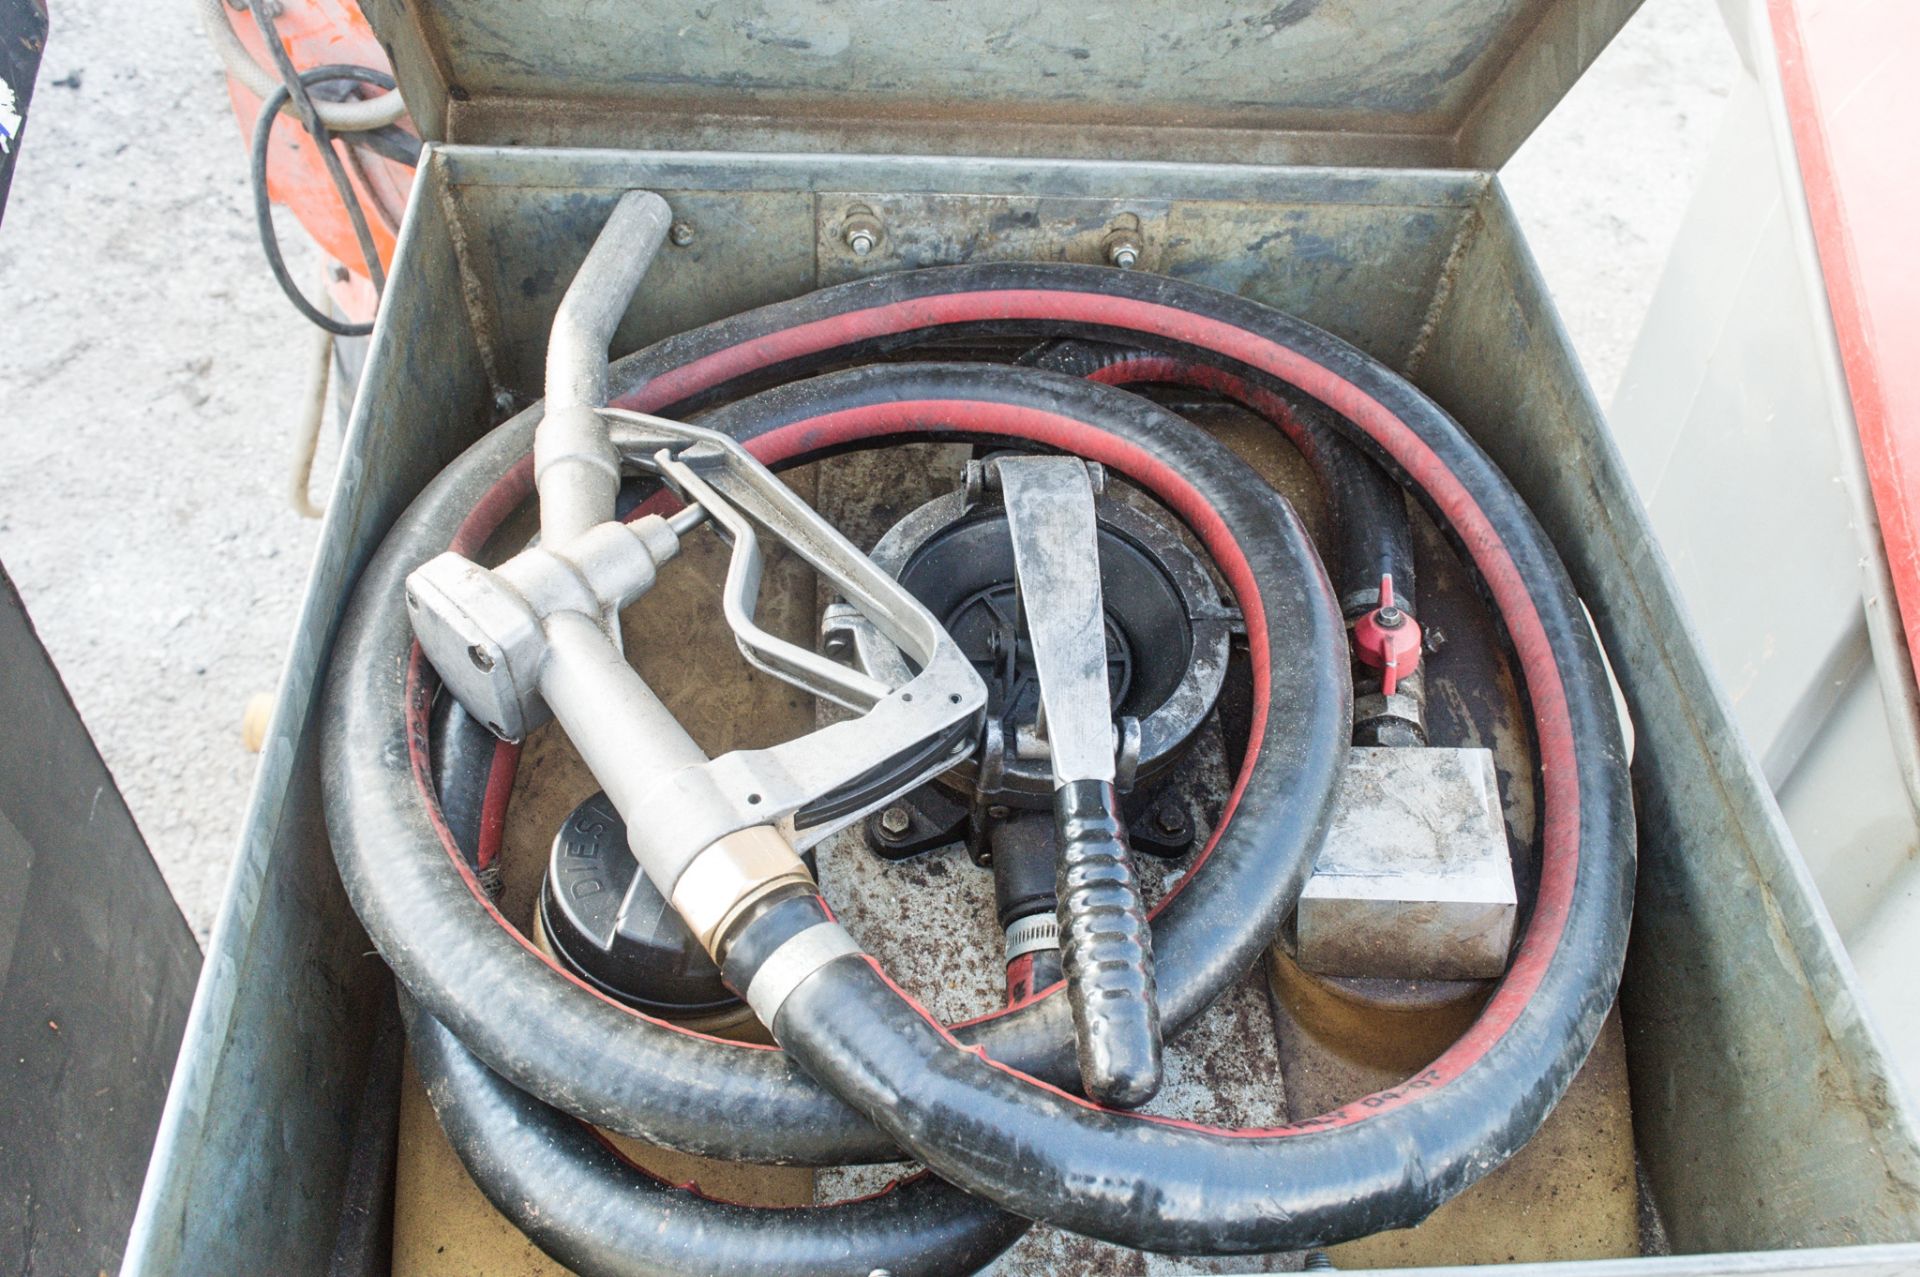 Western Easy Cube 100 litre fuel bowser c/w manual pump, delivery hose & nozzle - Image 2 of 2